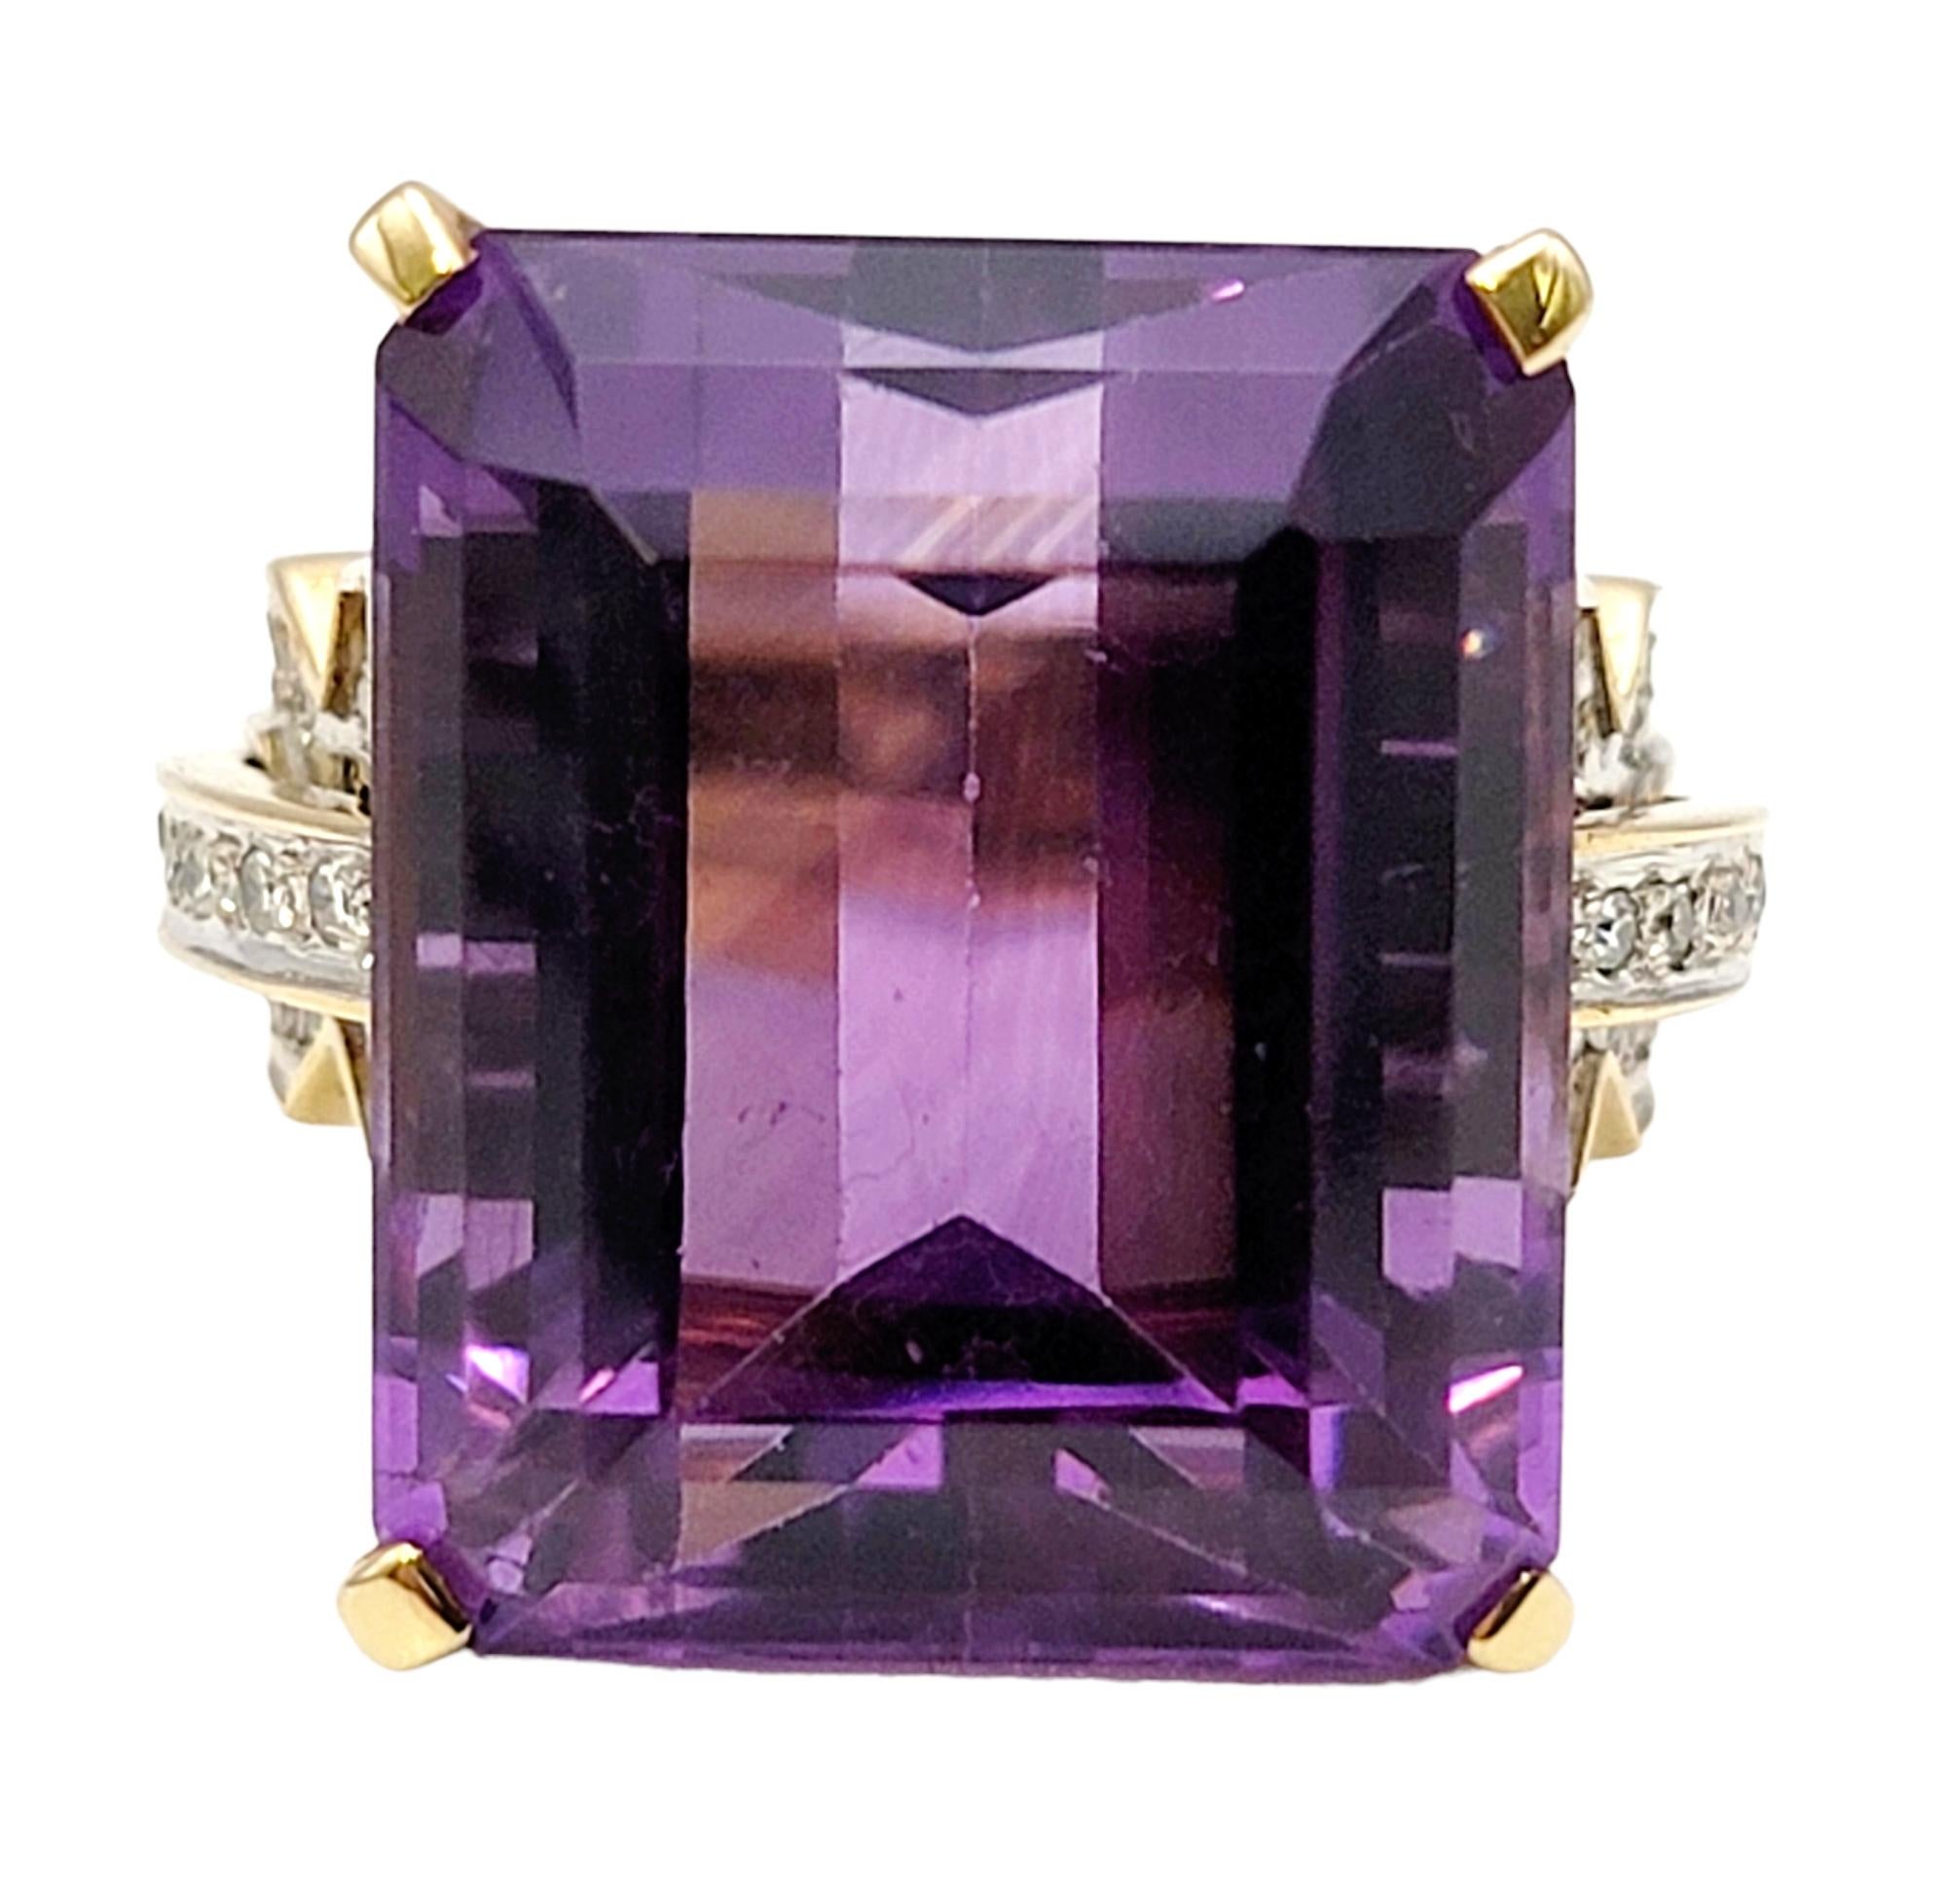 Ring size: 11

An absolute showstopper of a ring! This massive amethyst solitaire cocktail ring is set in luxurious yellow gold and accented by dazzling diamond detailing along the sides. The vibrant purple hue of the emerald cut amethyst really